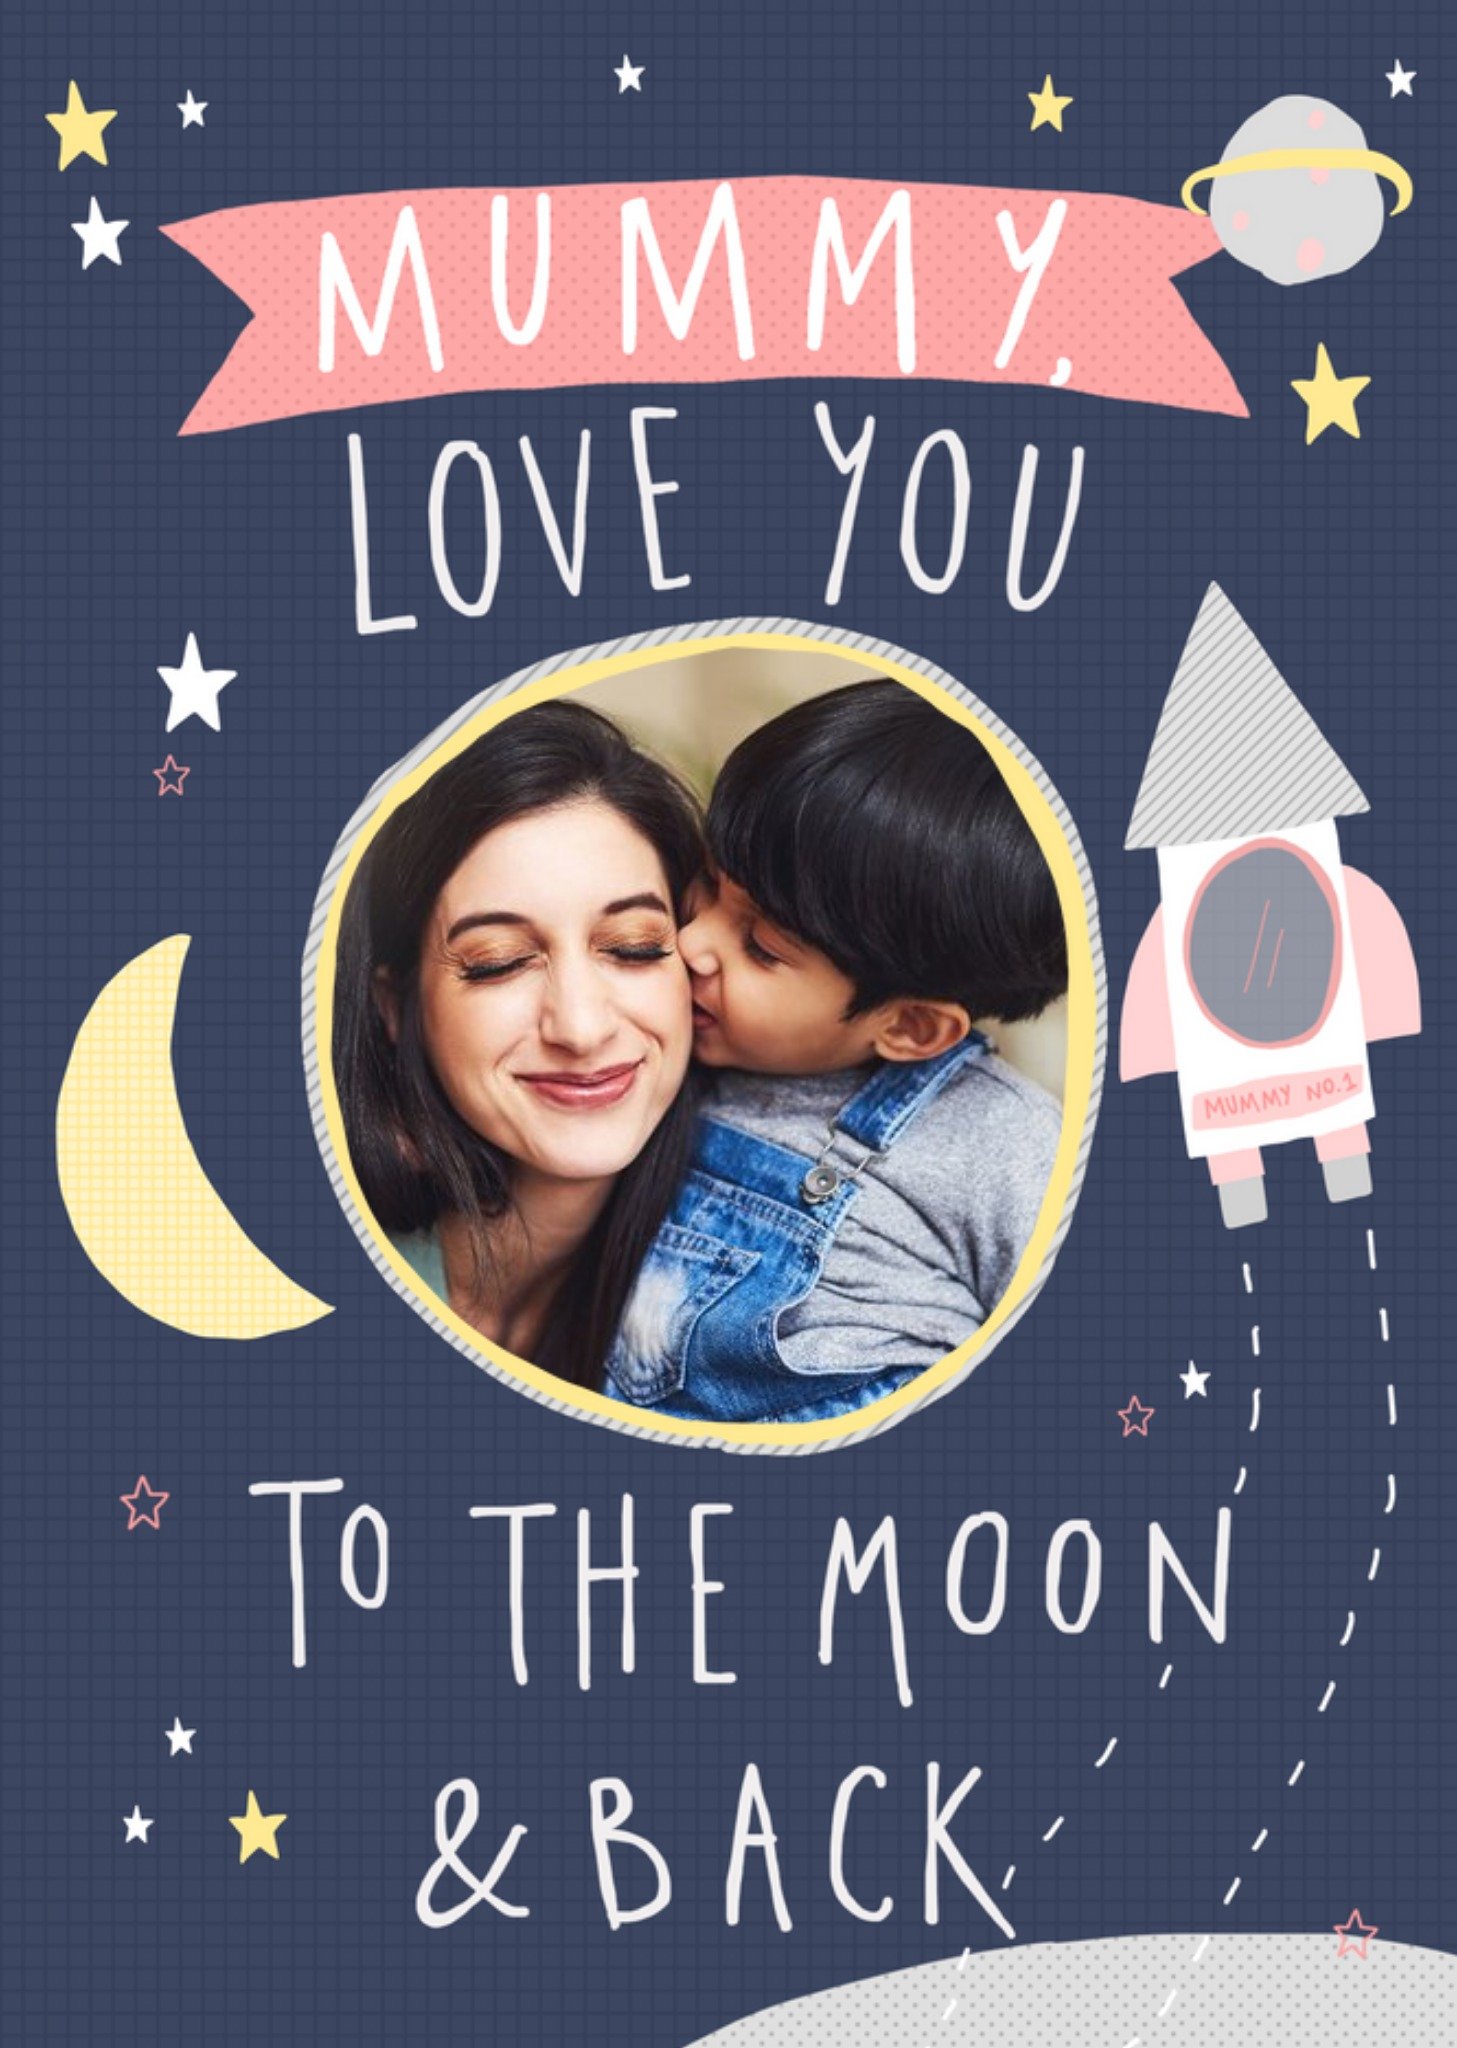 Moonpig Mother's Day Card - Mummy - Moon And Back - Photo Upload Card Postcard